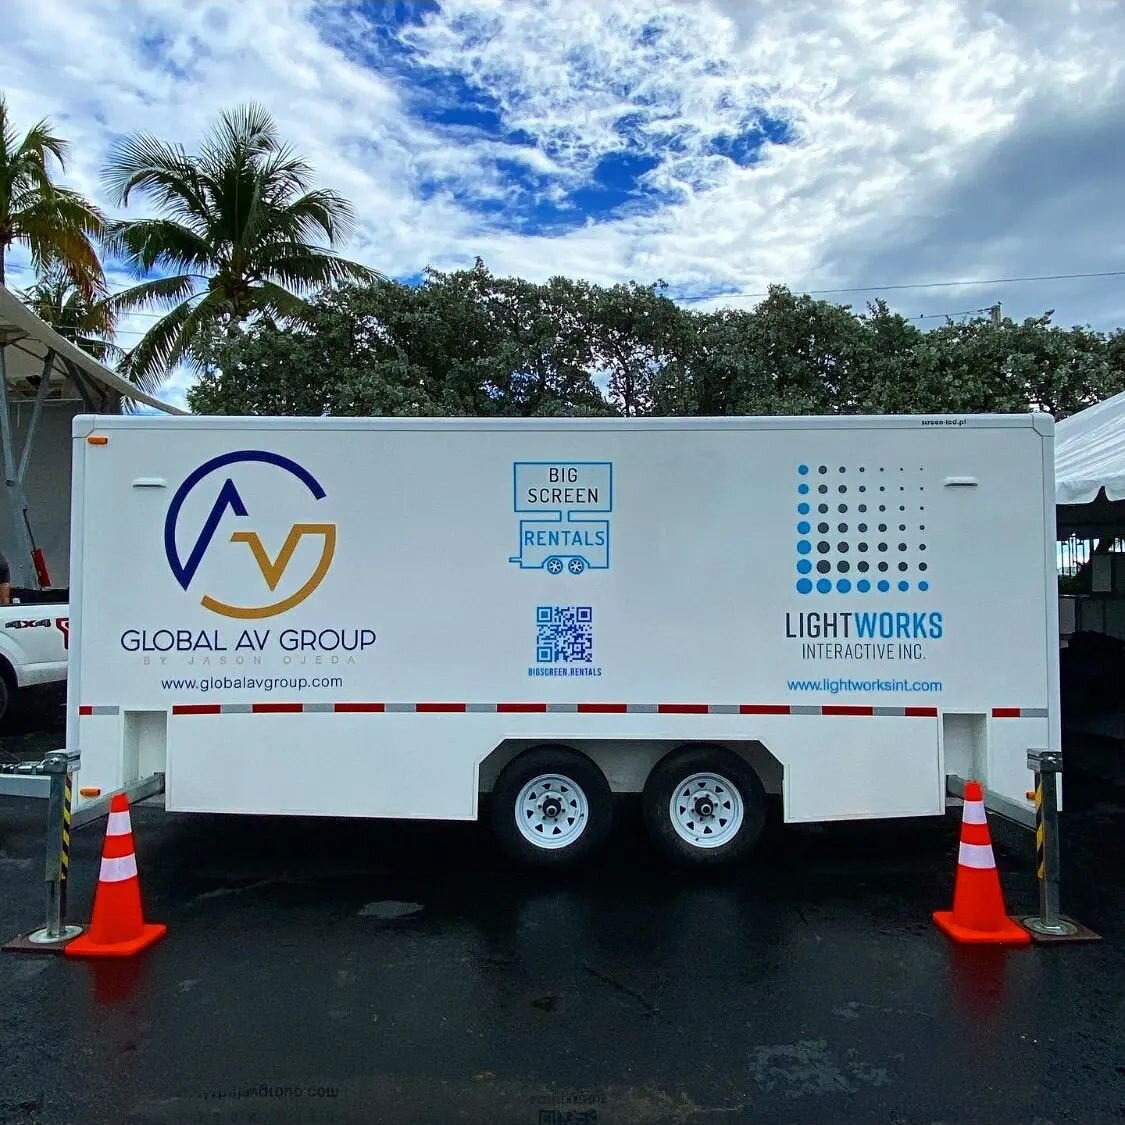 Fresh wash before the Mobile stage conference.

#mobilestageconference #ledvideowall #mobilevideo